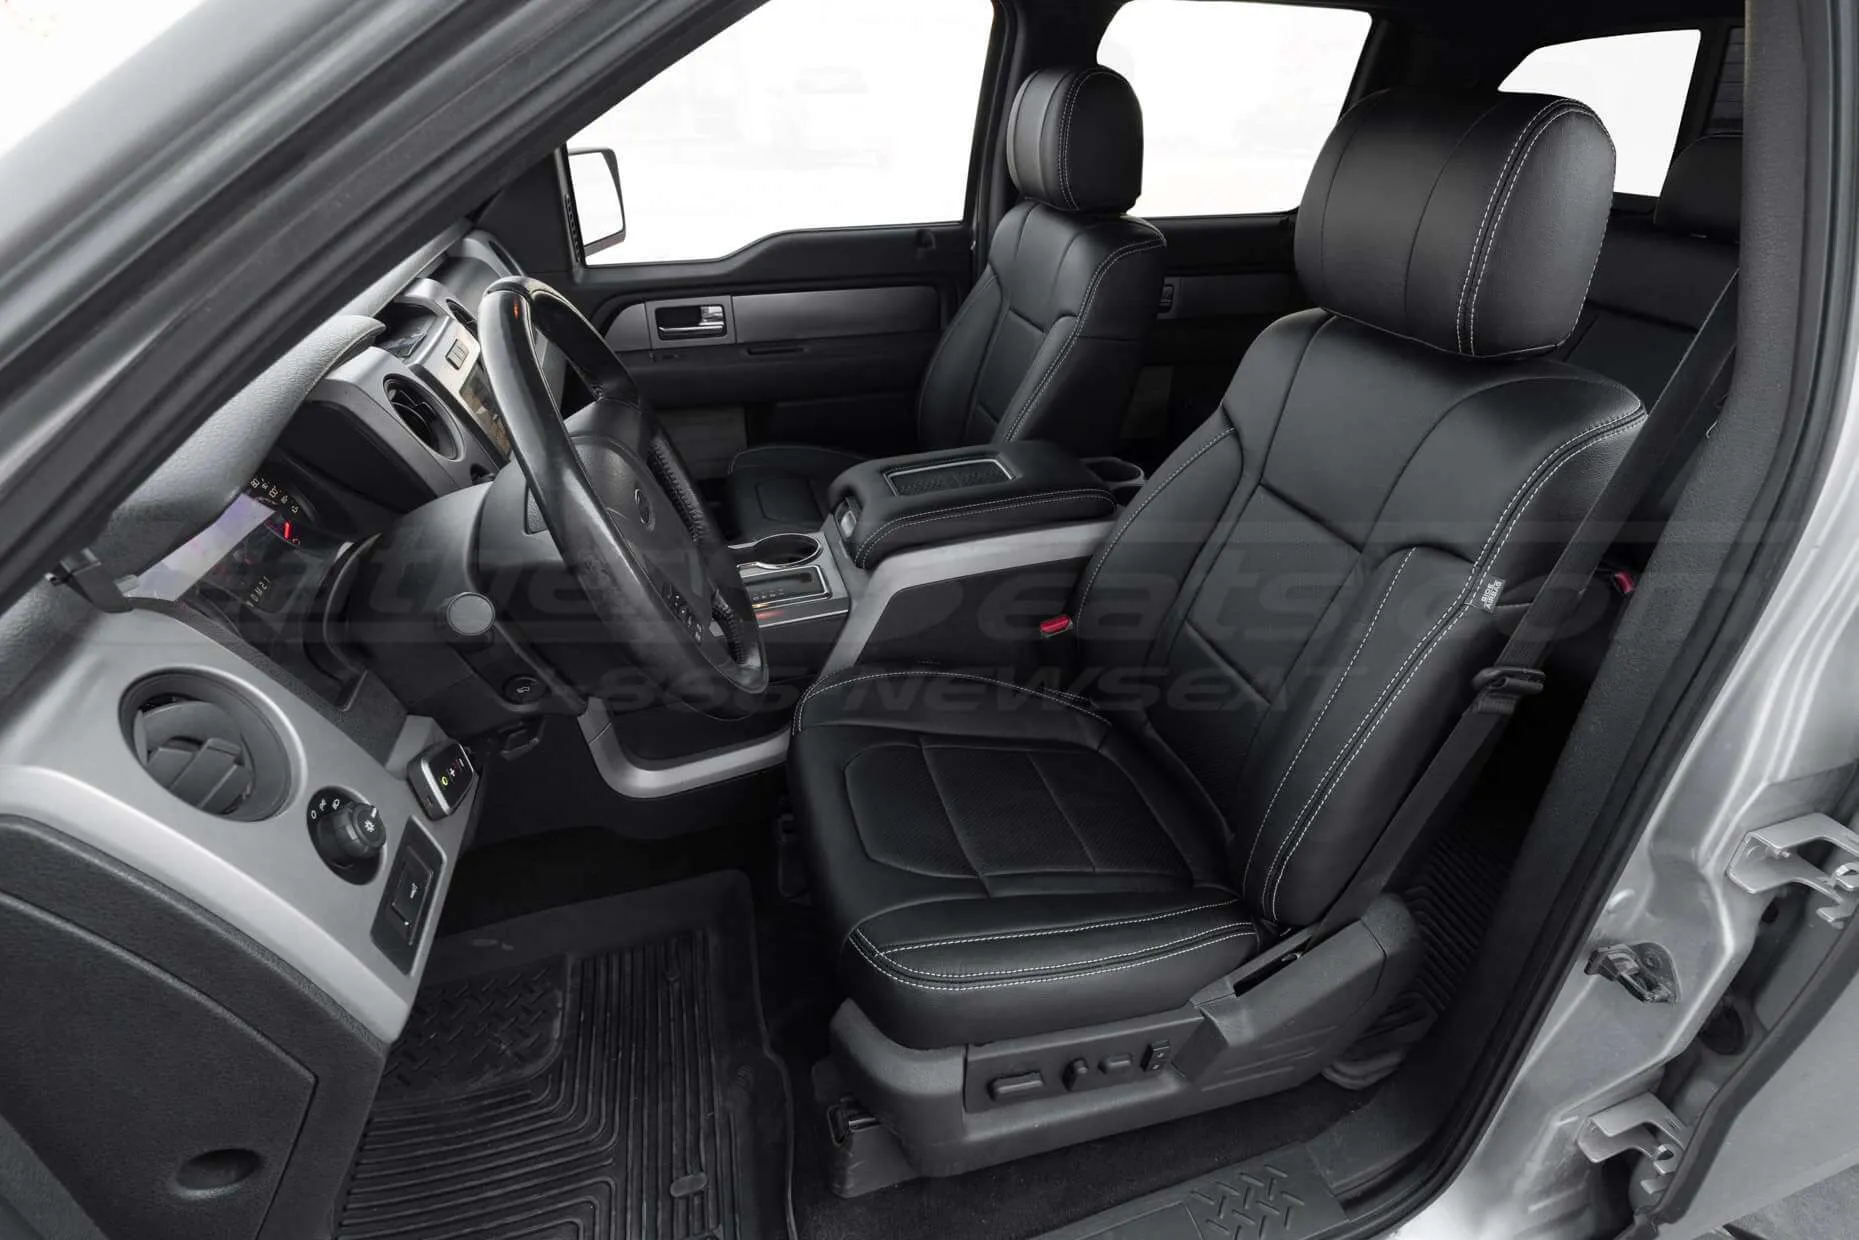 Black leather seats with Perforated Inserts for Ford Raptor